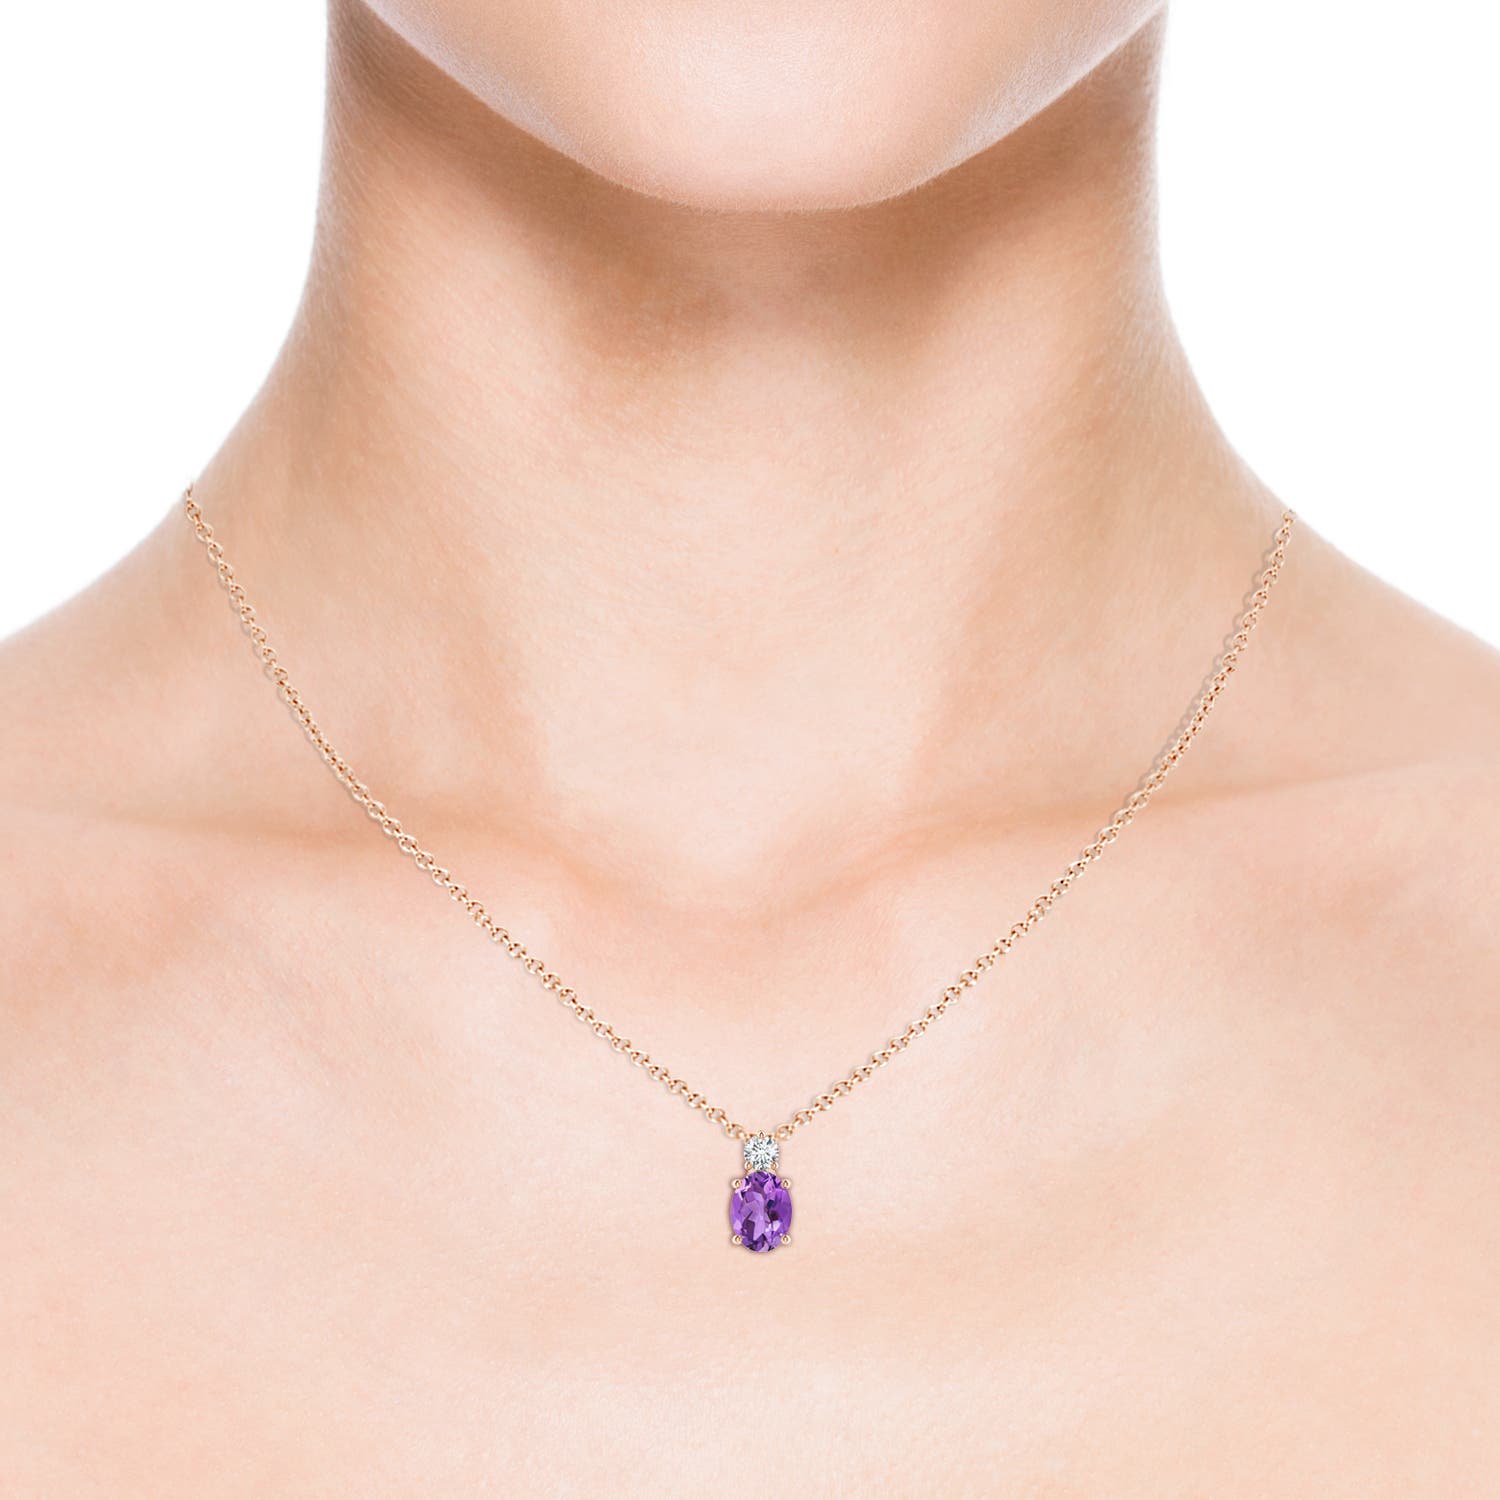 AA - Amethyst / 1.31 CT / 14 KT Rose Gold